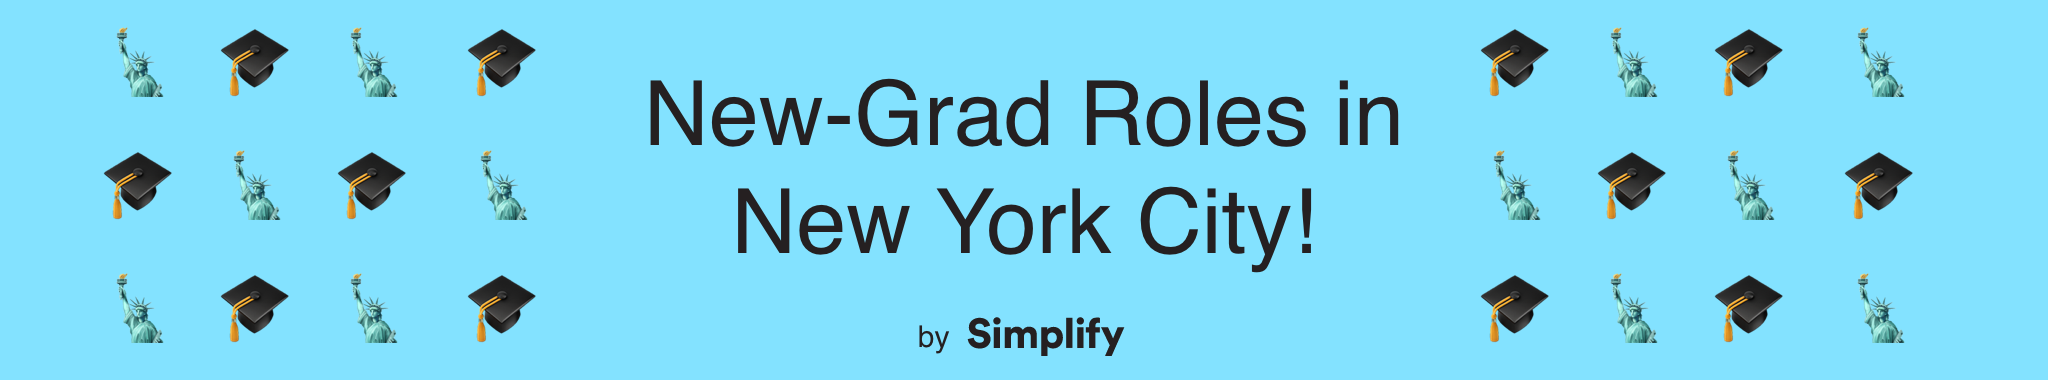 text that says “New Grad Roles in New York City!” surrounded by graduation caps and statue of liberty emojis